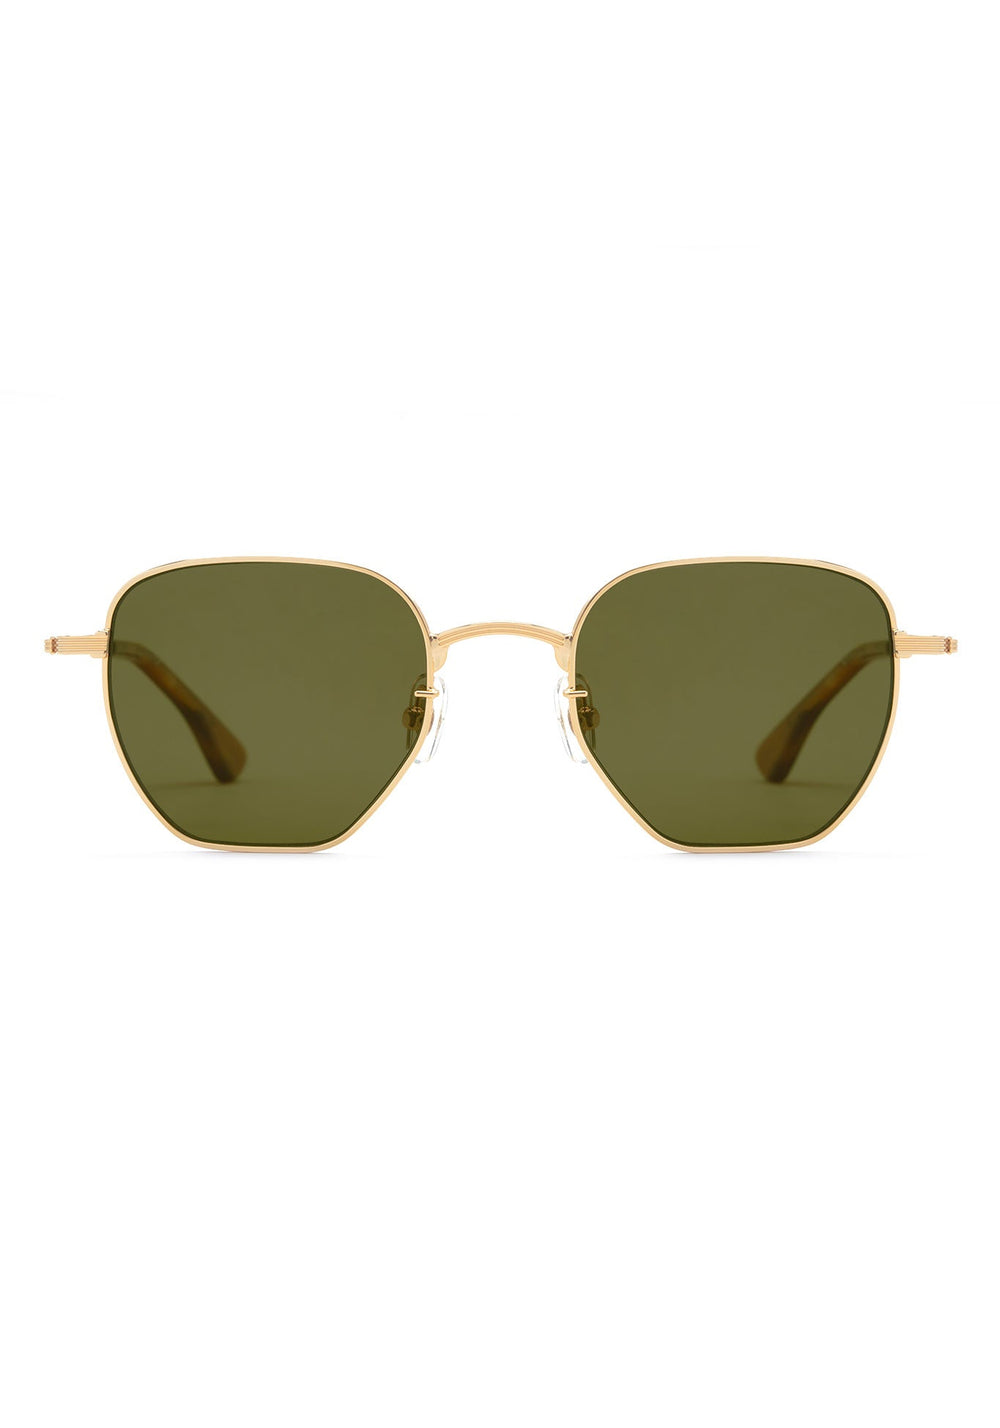 TROY | 18K + Tobacco Polarized Handcrafted, Luxury stainless steel KREWE sunglasses